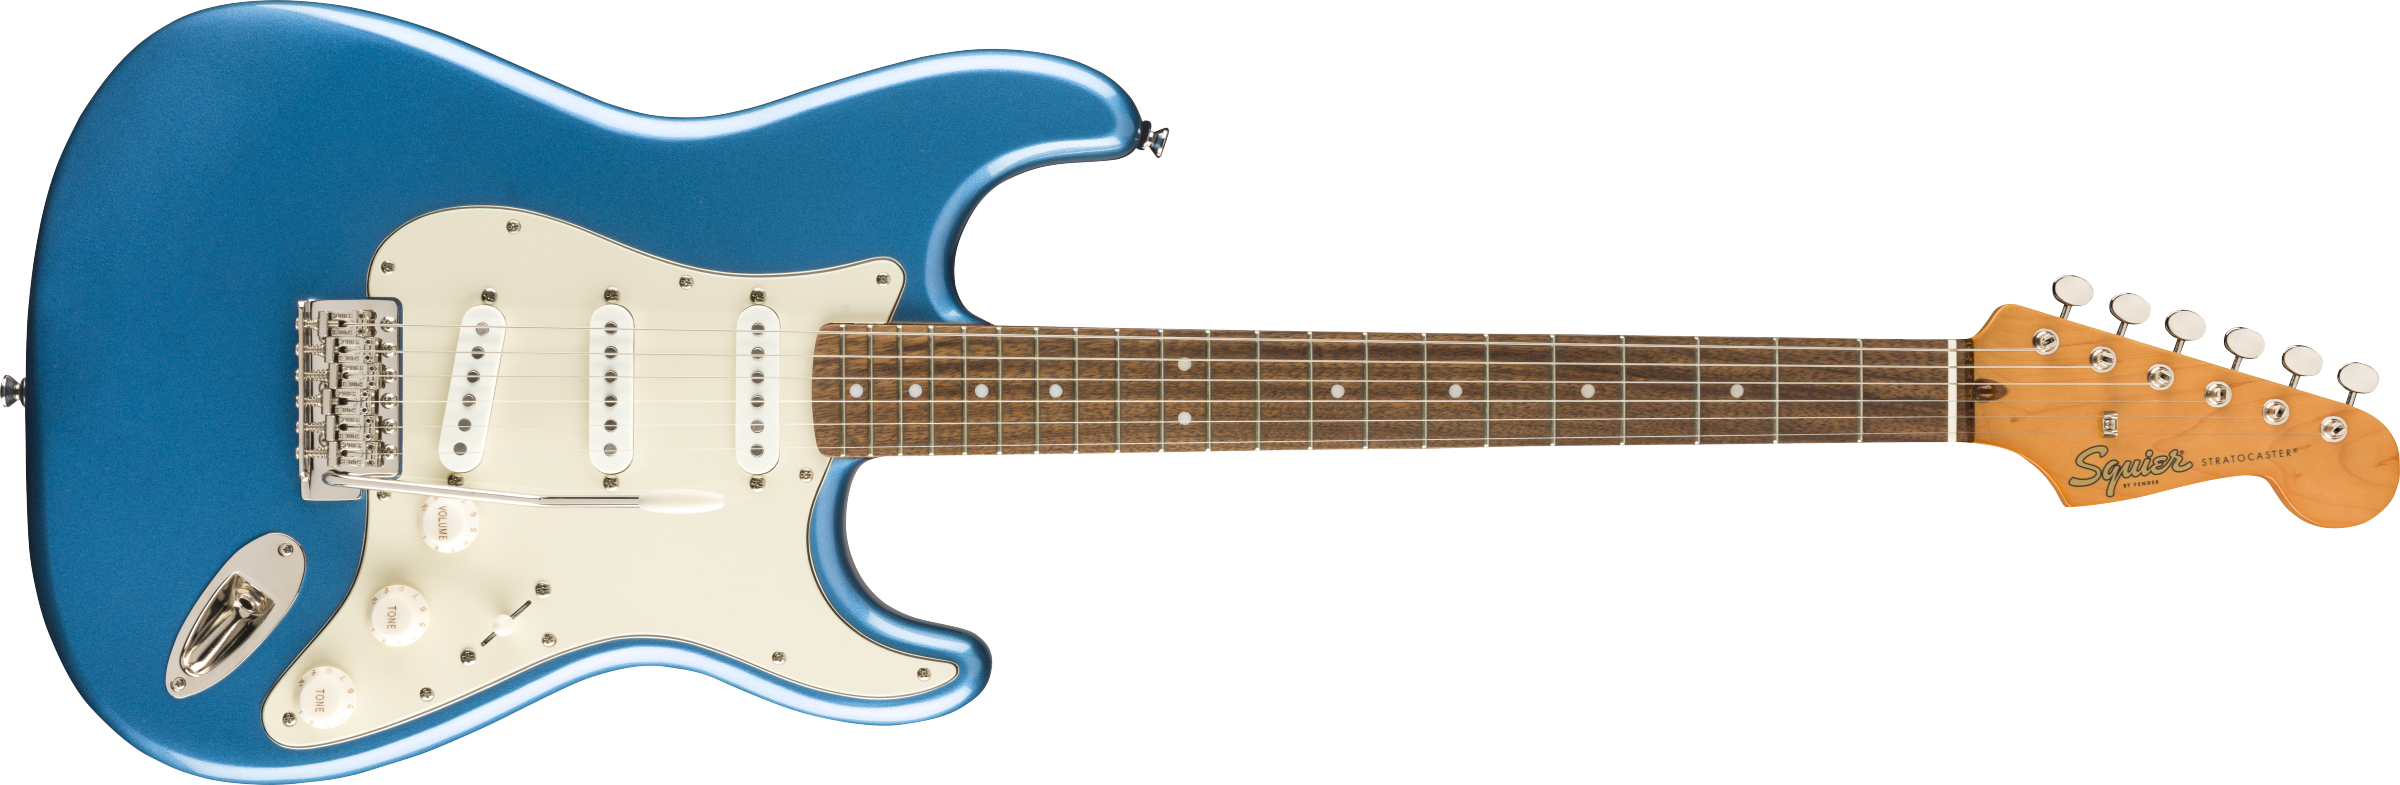 Squier® Classic Vibe '60s Stratocaster®, Laurel Fingerboard, Lake Placid Blue